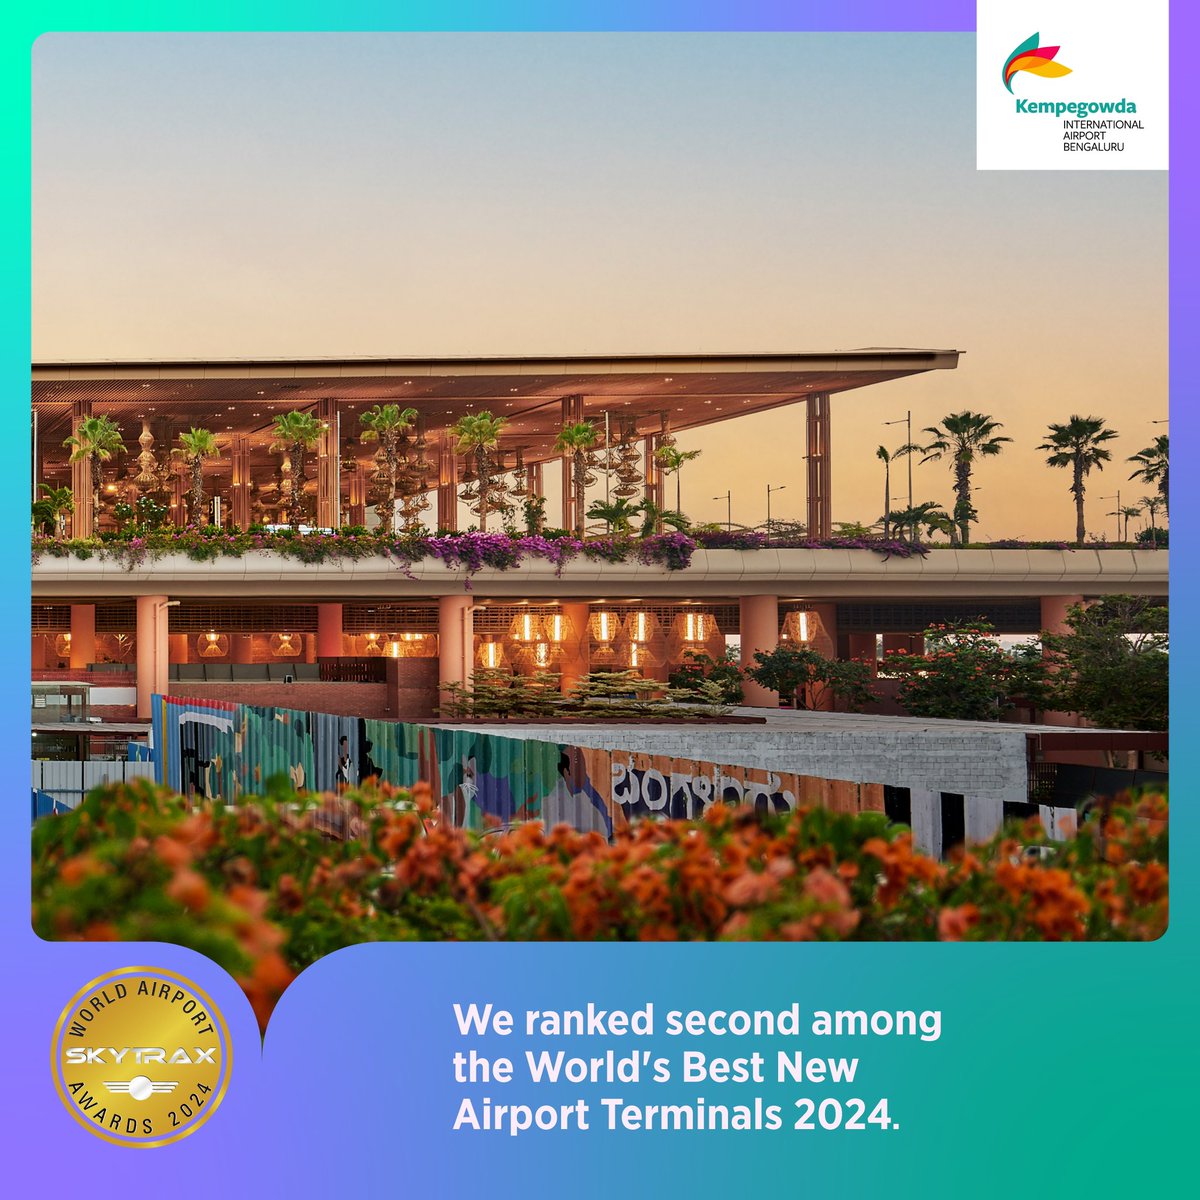 We are pleased to announce that #BLRAirport has been recognised as 'The Best Regional Airport in India and South Asia' and ranked 2nd as the 'World's Best New Airport Terminal' at the Skytrax World Airport Awards. This honour is a testament to our commitment to providing